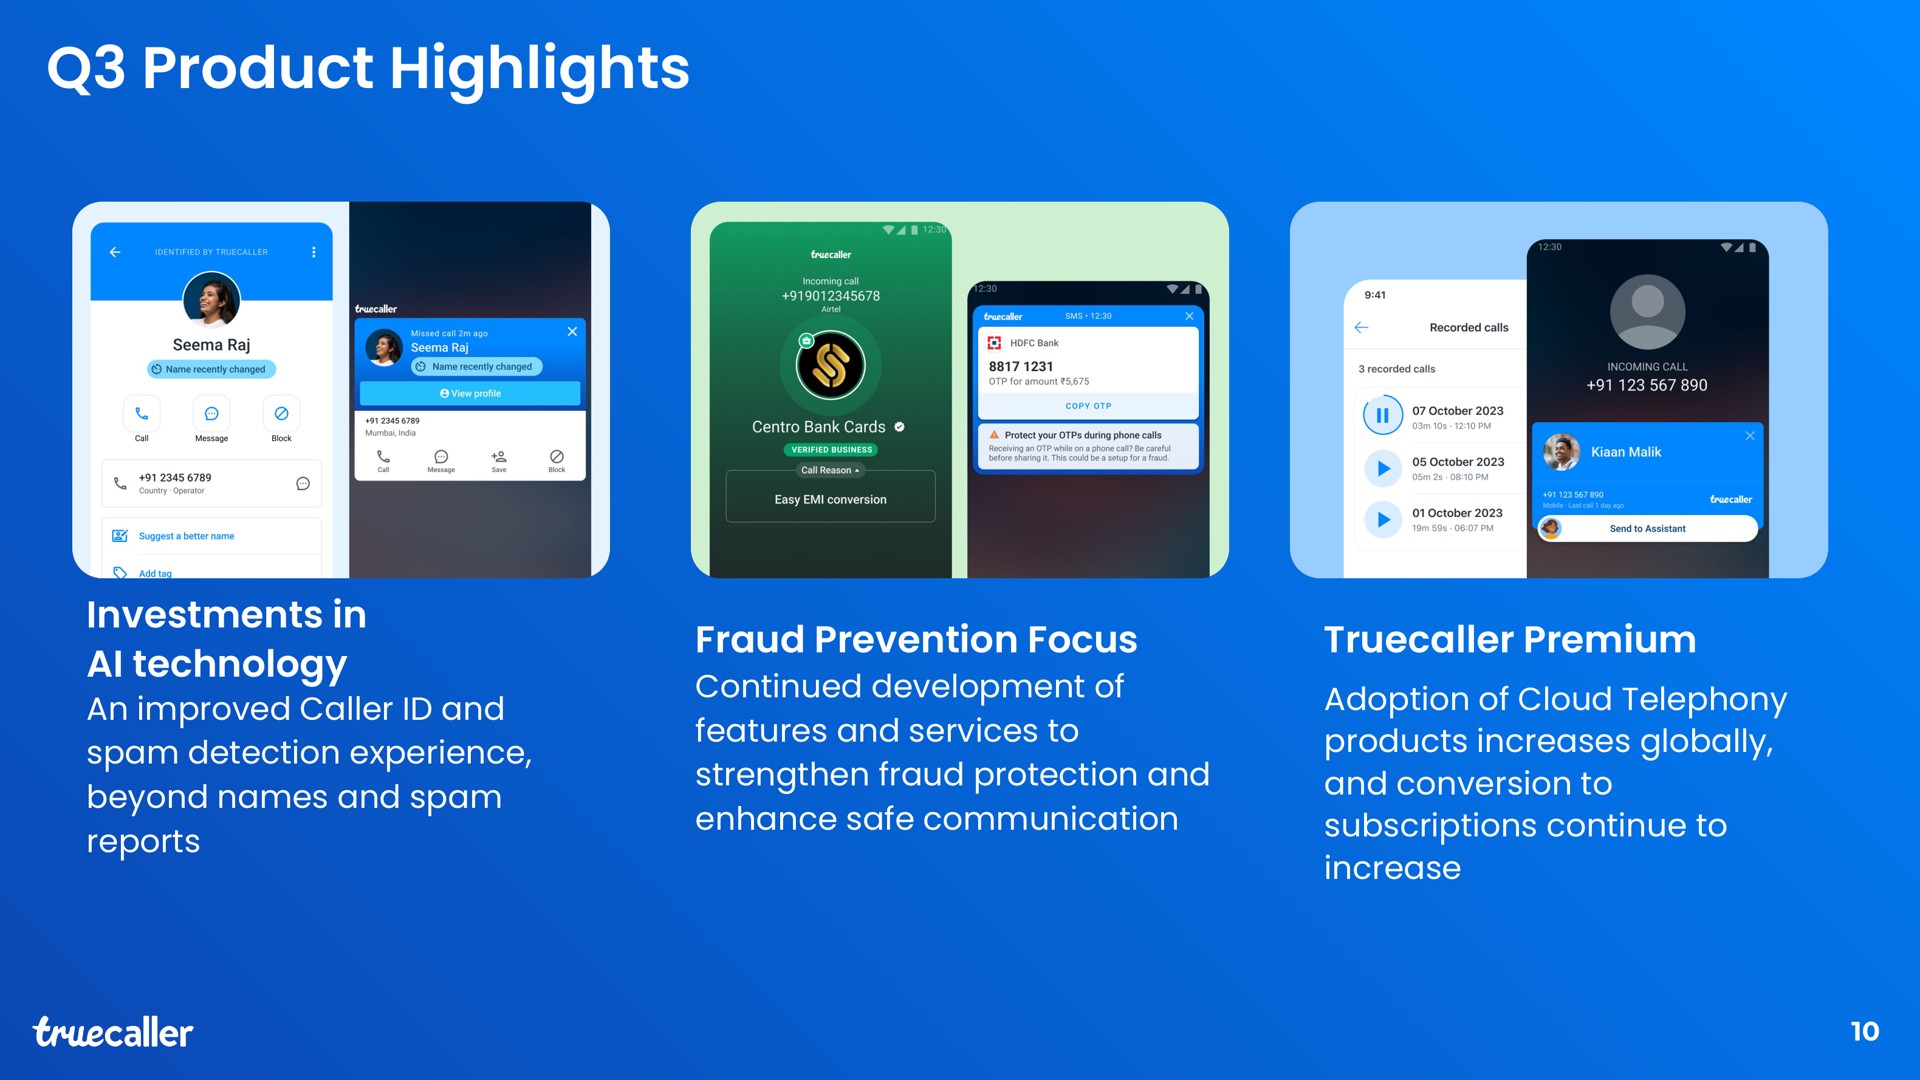 product highlights investments in technology an improved caller and detection experience beyond names and reports fraud prevention focus continued development of features and services to strengthen fraud protection and enhance safe communication premium adoption of cloud telephony products increases globally and conversion to subscriptions continue to increase | Truecaller